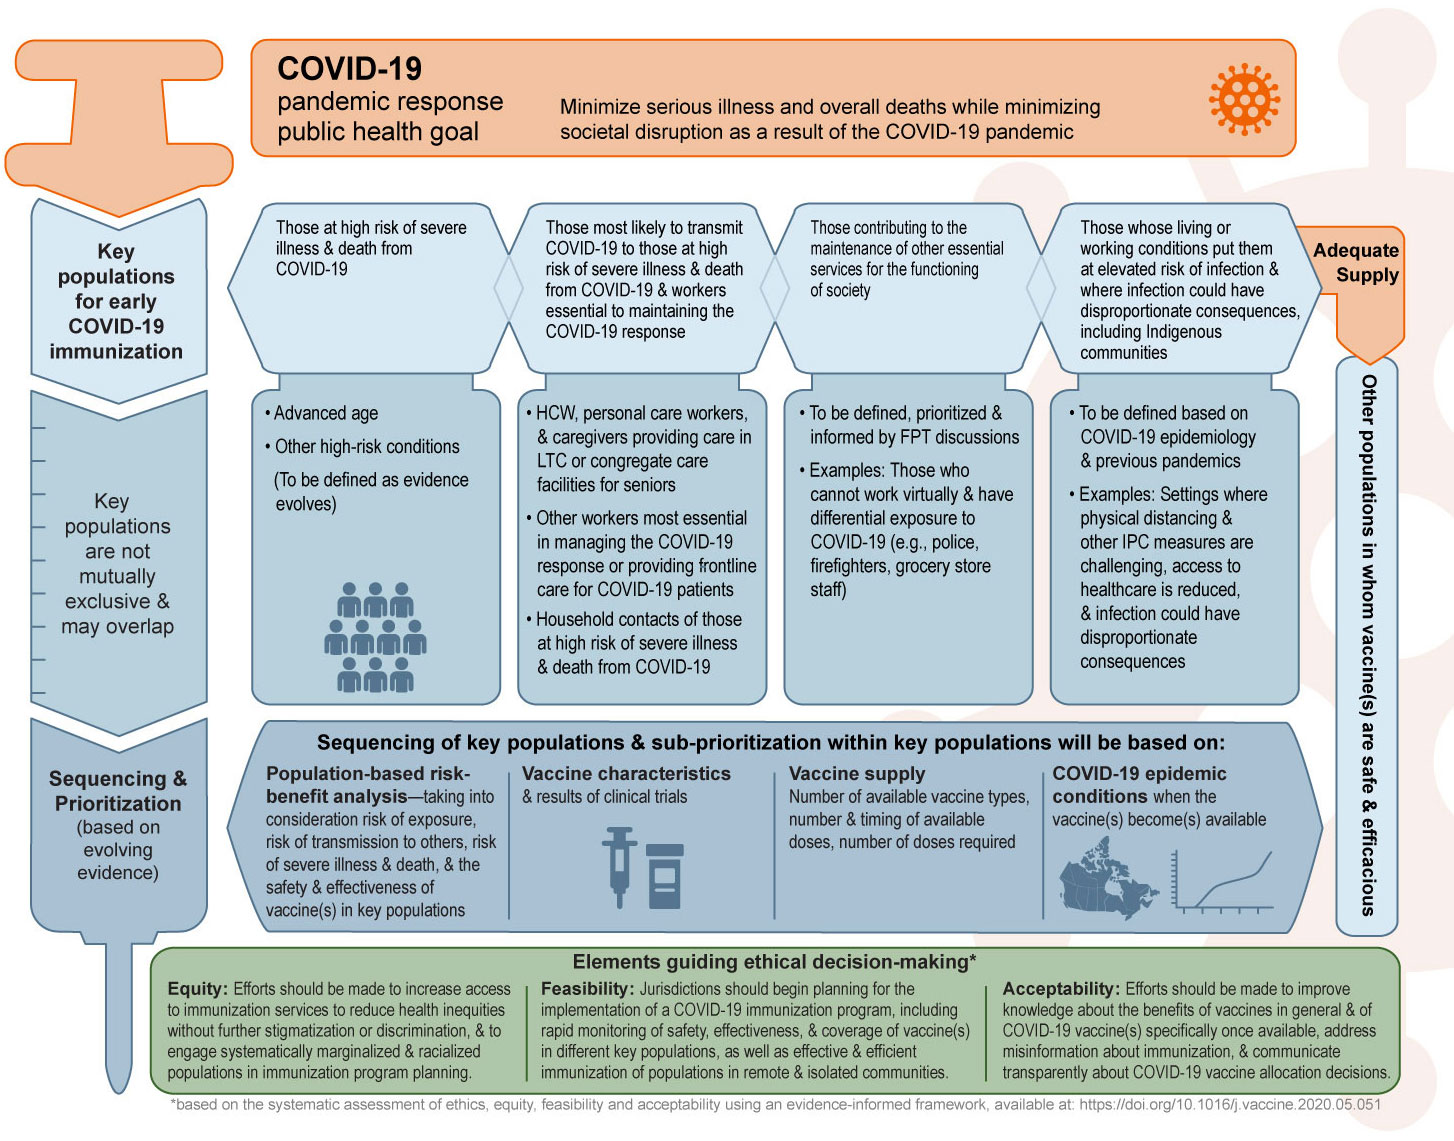 Figure 1: Summary of the preliminary NACI recommendations on key populations for early COVID-19 immunization